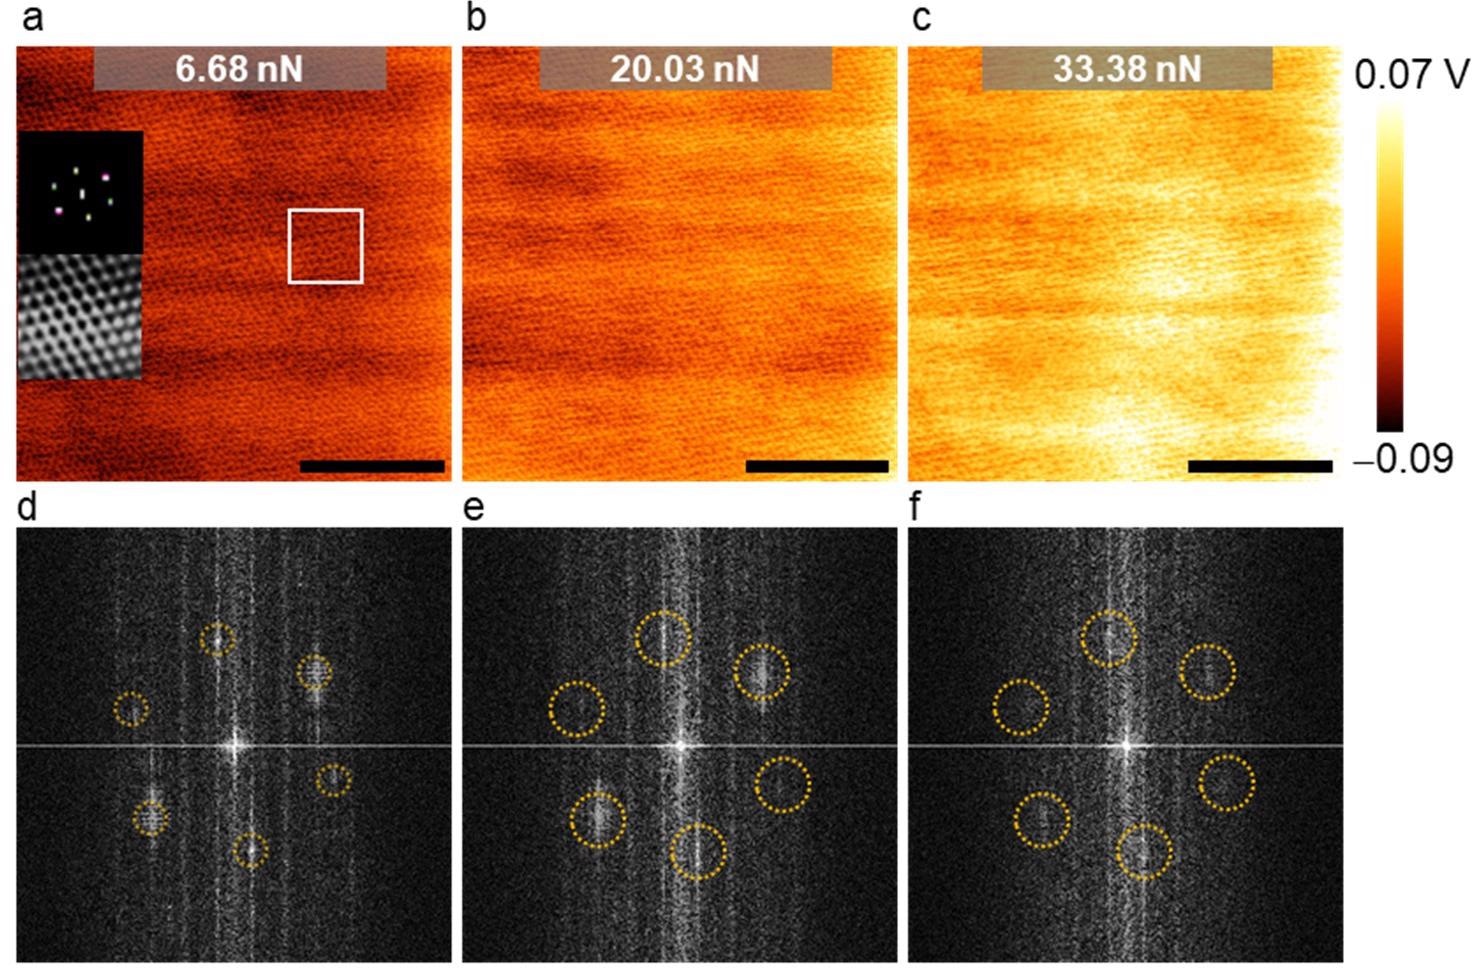 The effect of load (i.e. set point) on LFM network images.  (a–c) LFM raw data of MoS2 at various loadings (calibrated scale bar: 5 nm; frequency: 17.1 Hz).  The insets in (a) represent the filtered FFT images of the area bounded by the white rectangle and its corresponding inverse FFT image;  (d–f) Corresponding unfiltered FFT images of MoS2.  The six FFT spots associated with the hexagonal lattice structure are highlighted by dashed circles.  The spots were less visible at a load of 33.38 nN, as seen in (f).